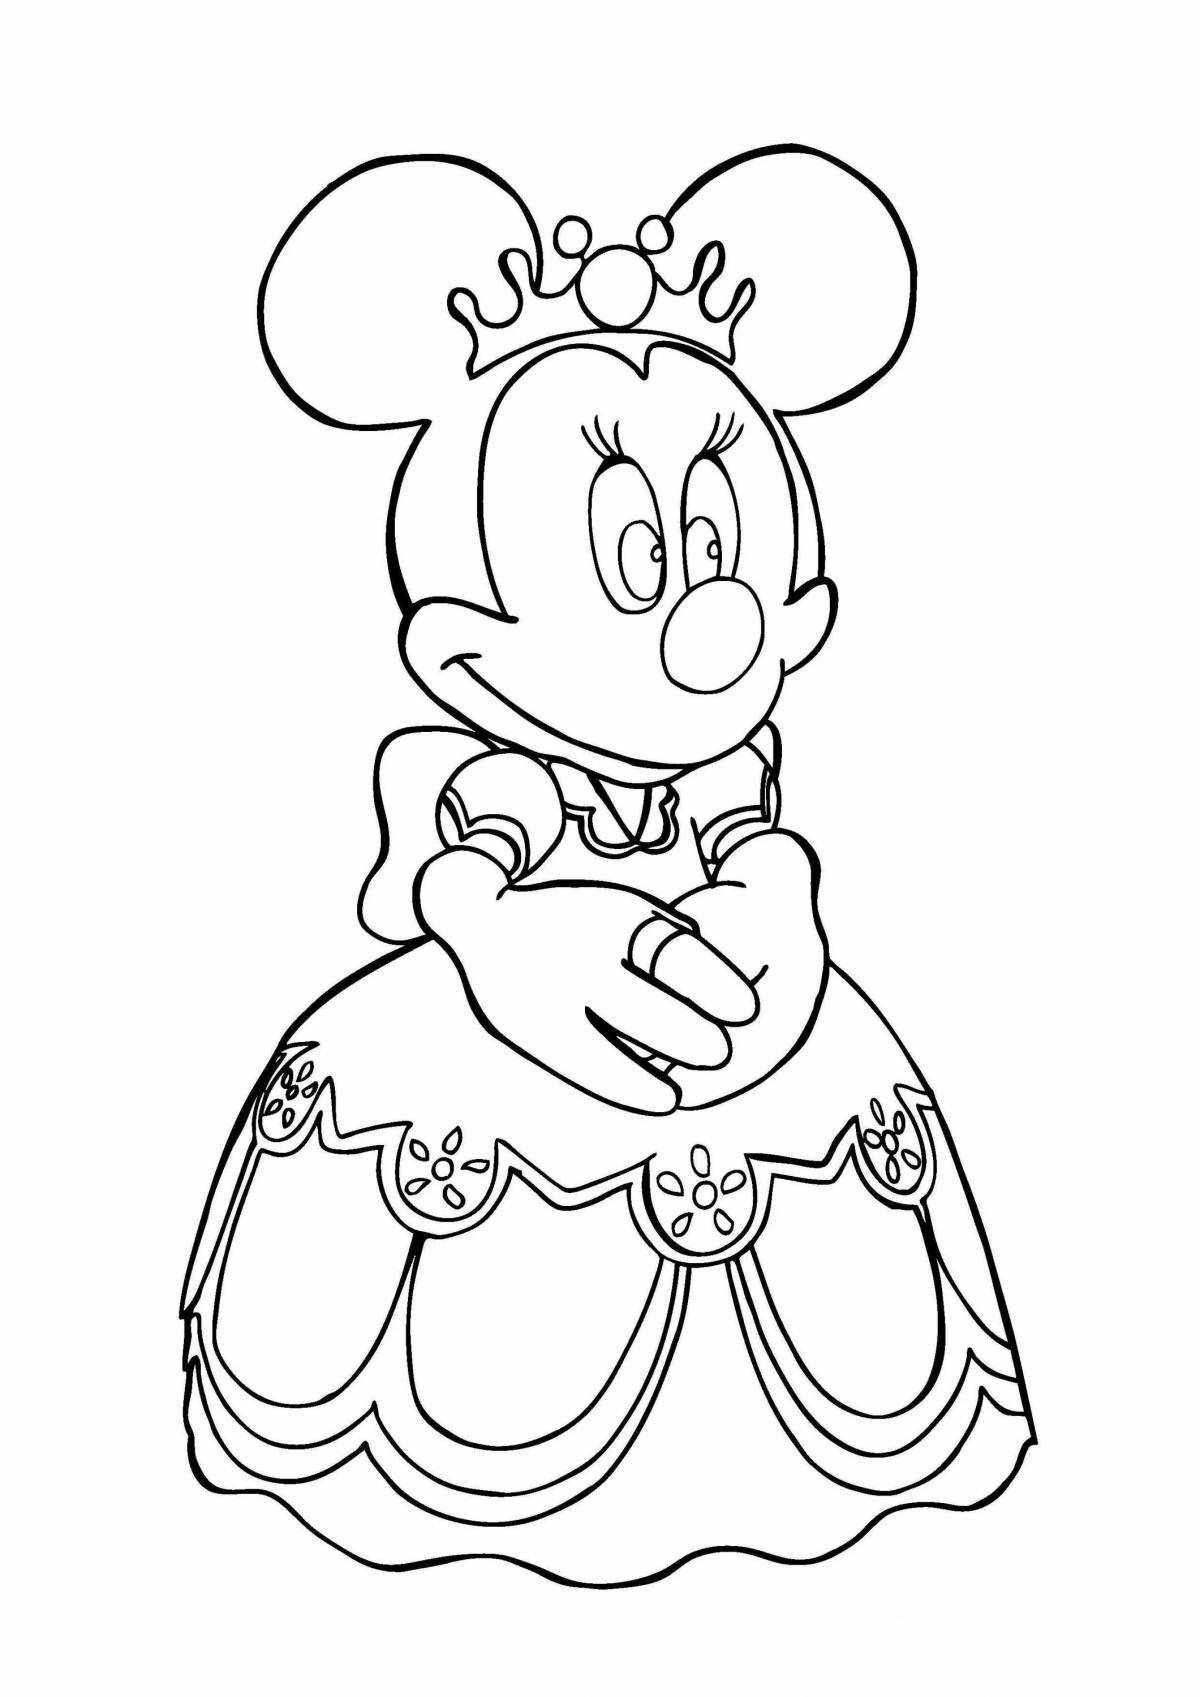 Minnie's funny coloring book